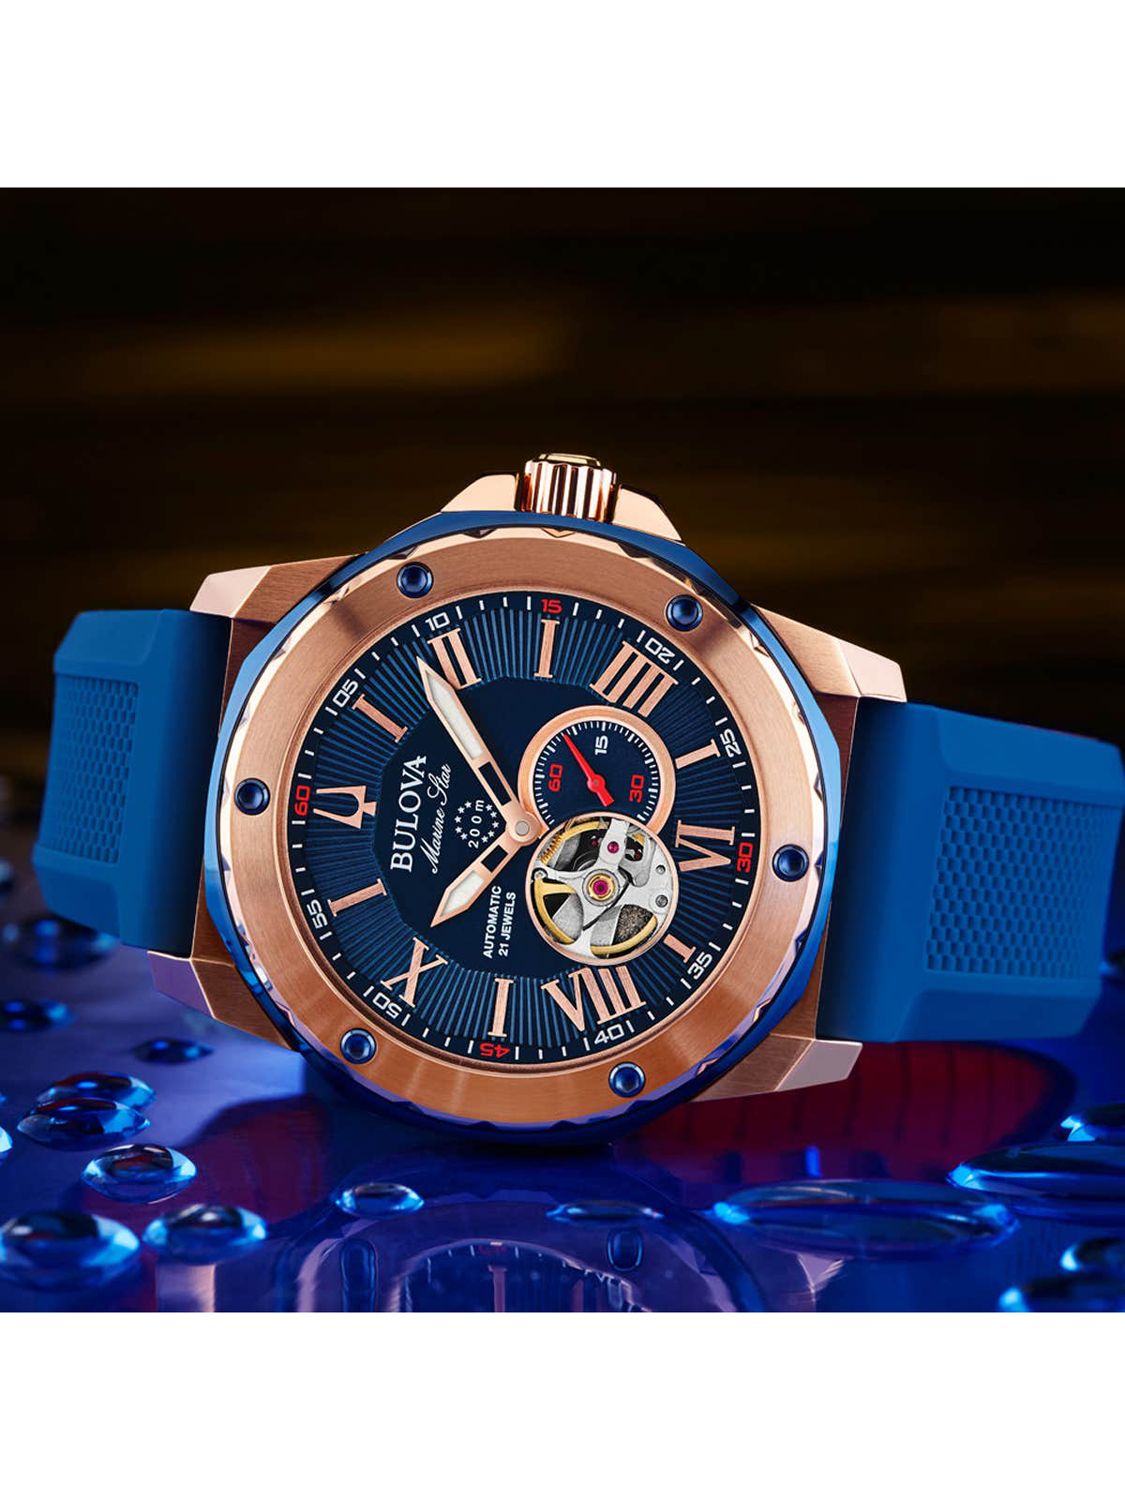 Buy Bulova 98A227 Men's Marine Star Automatic Heartbeat Silicone Strap Watch, Blue Online at johnlewis.com